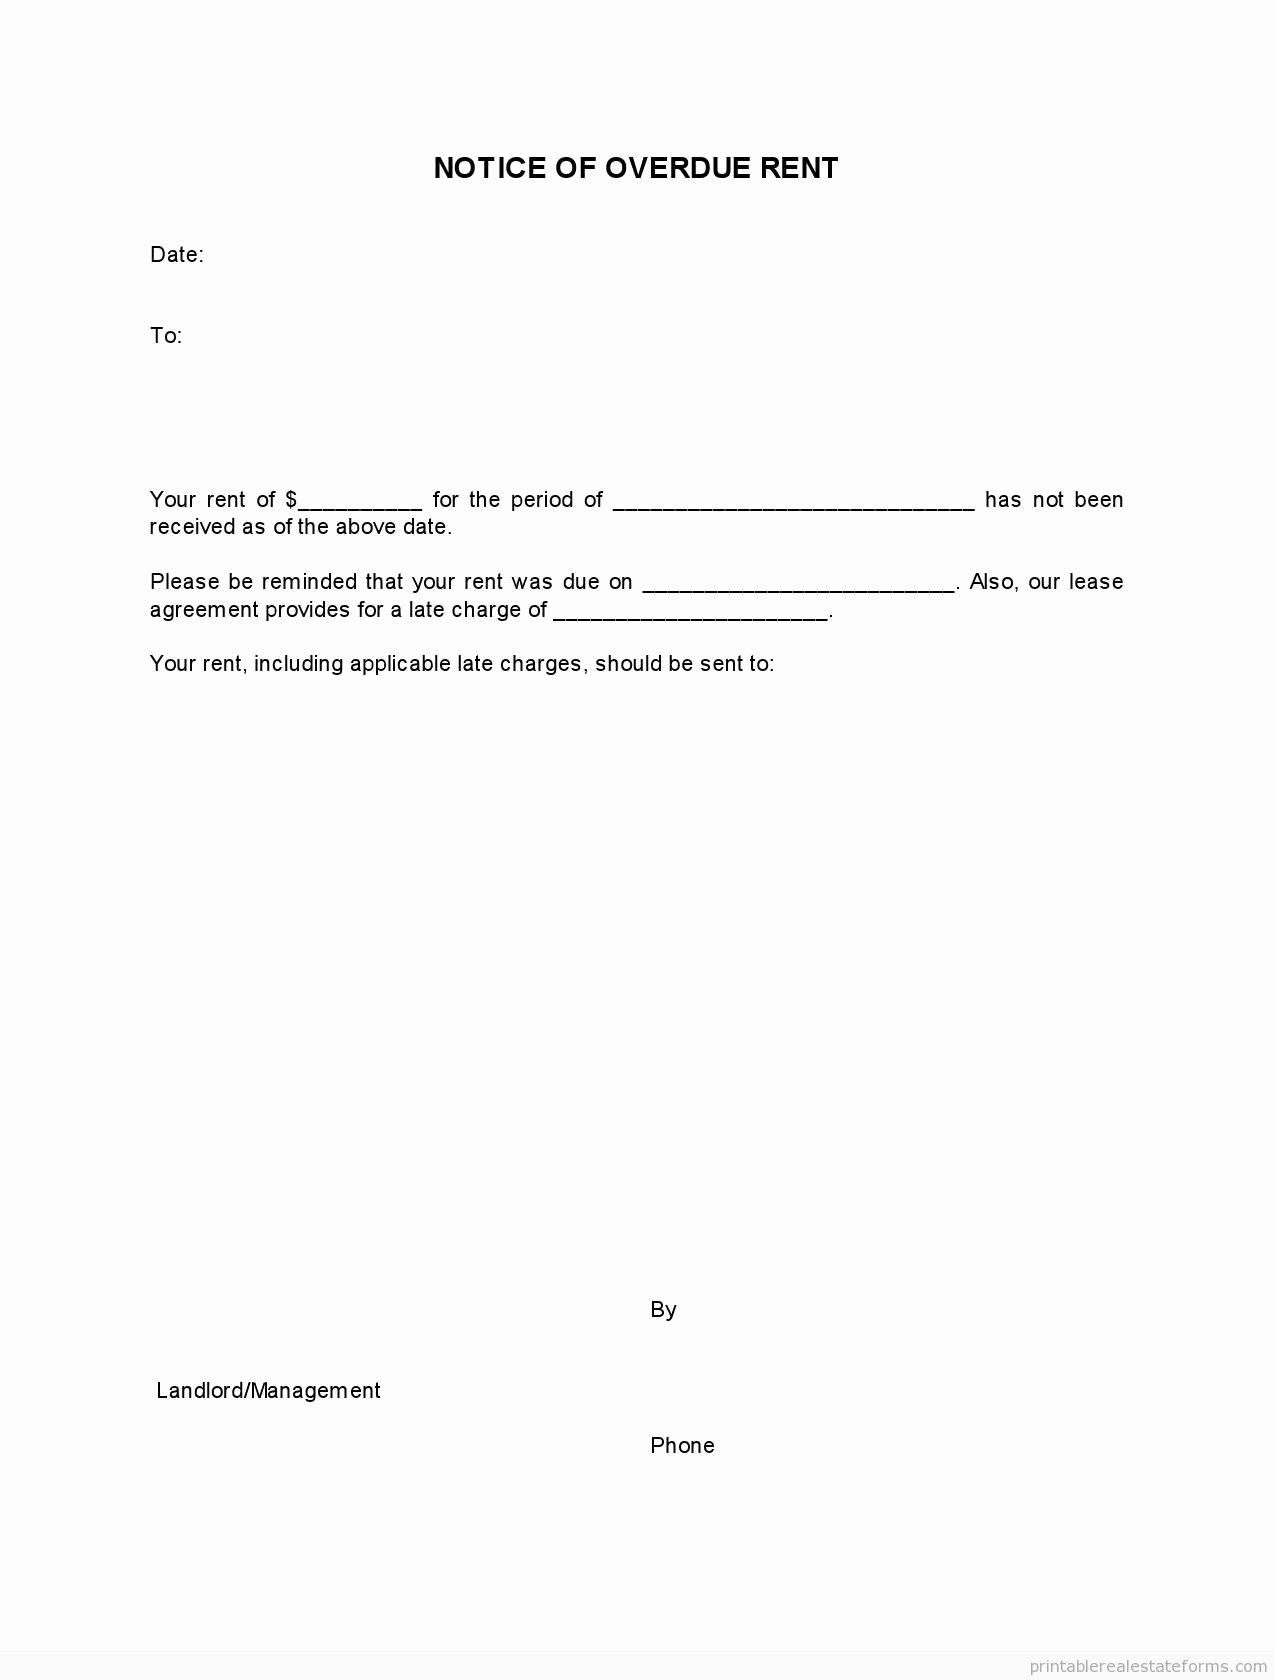 Late Rent Notice Template Free Luxury Sample Printable Notice Of Overdue Rent form